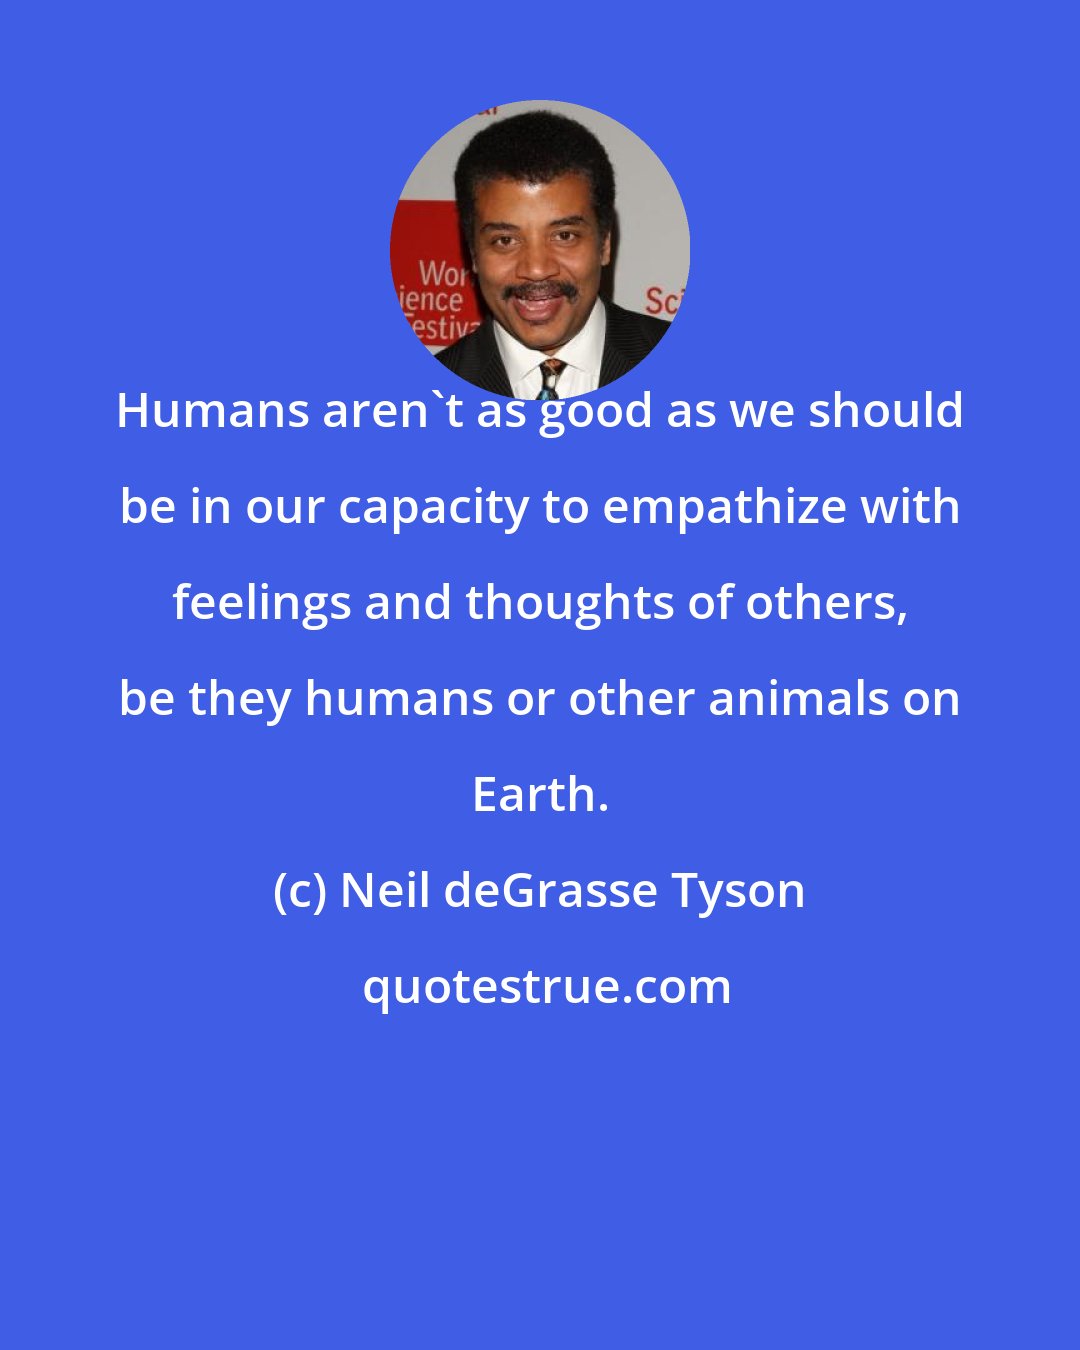 Neil deGrasse Tyson: Humans aren't as good as we should be in our capacity to empathize with feelings and thoughts of others, be they humans or other animals on Earth.